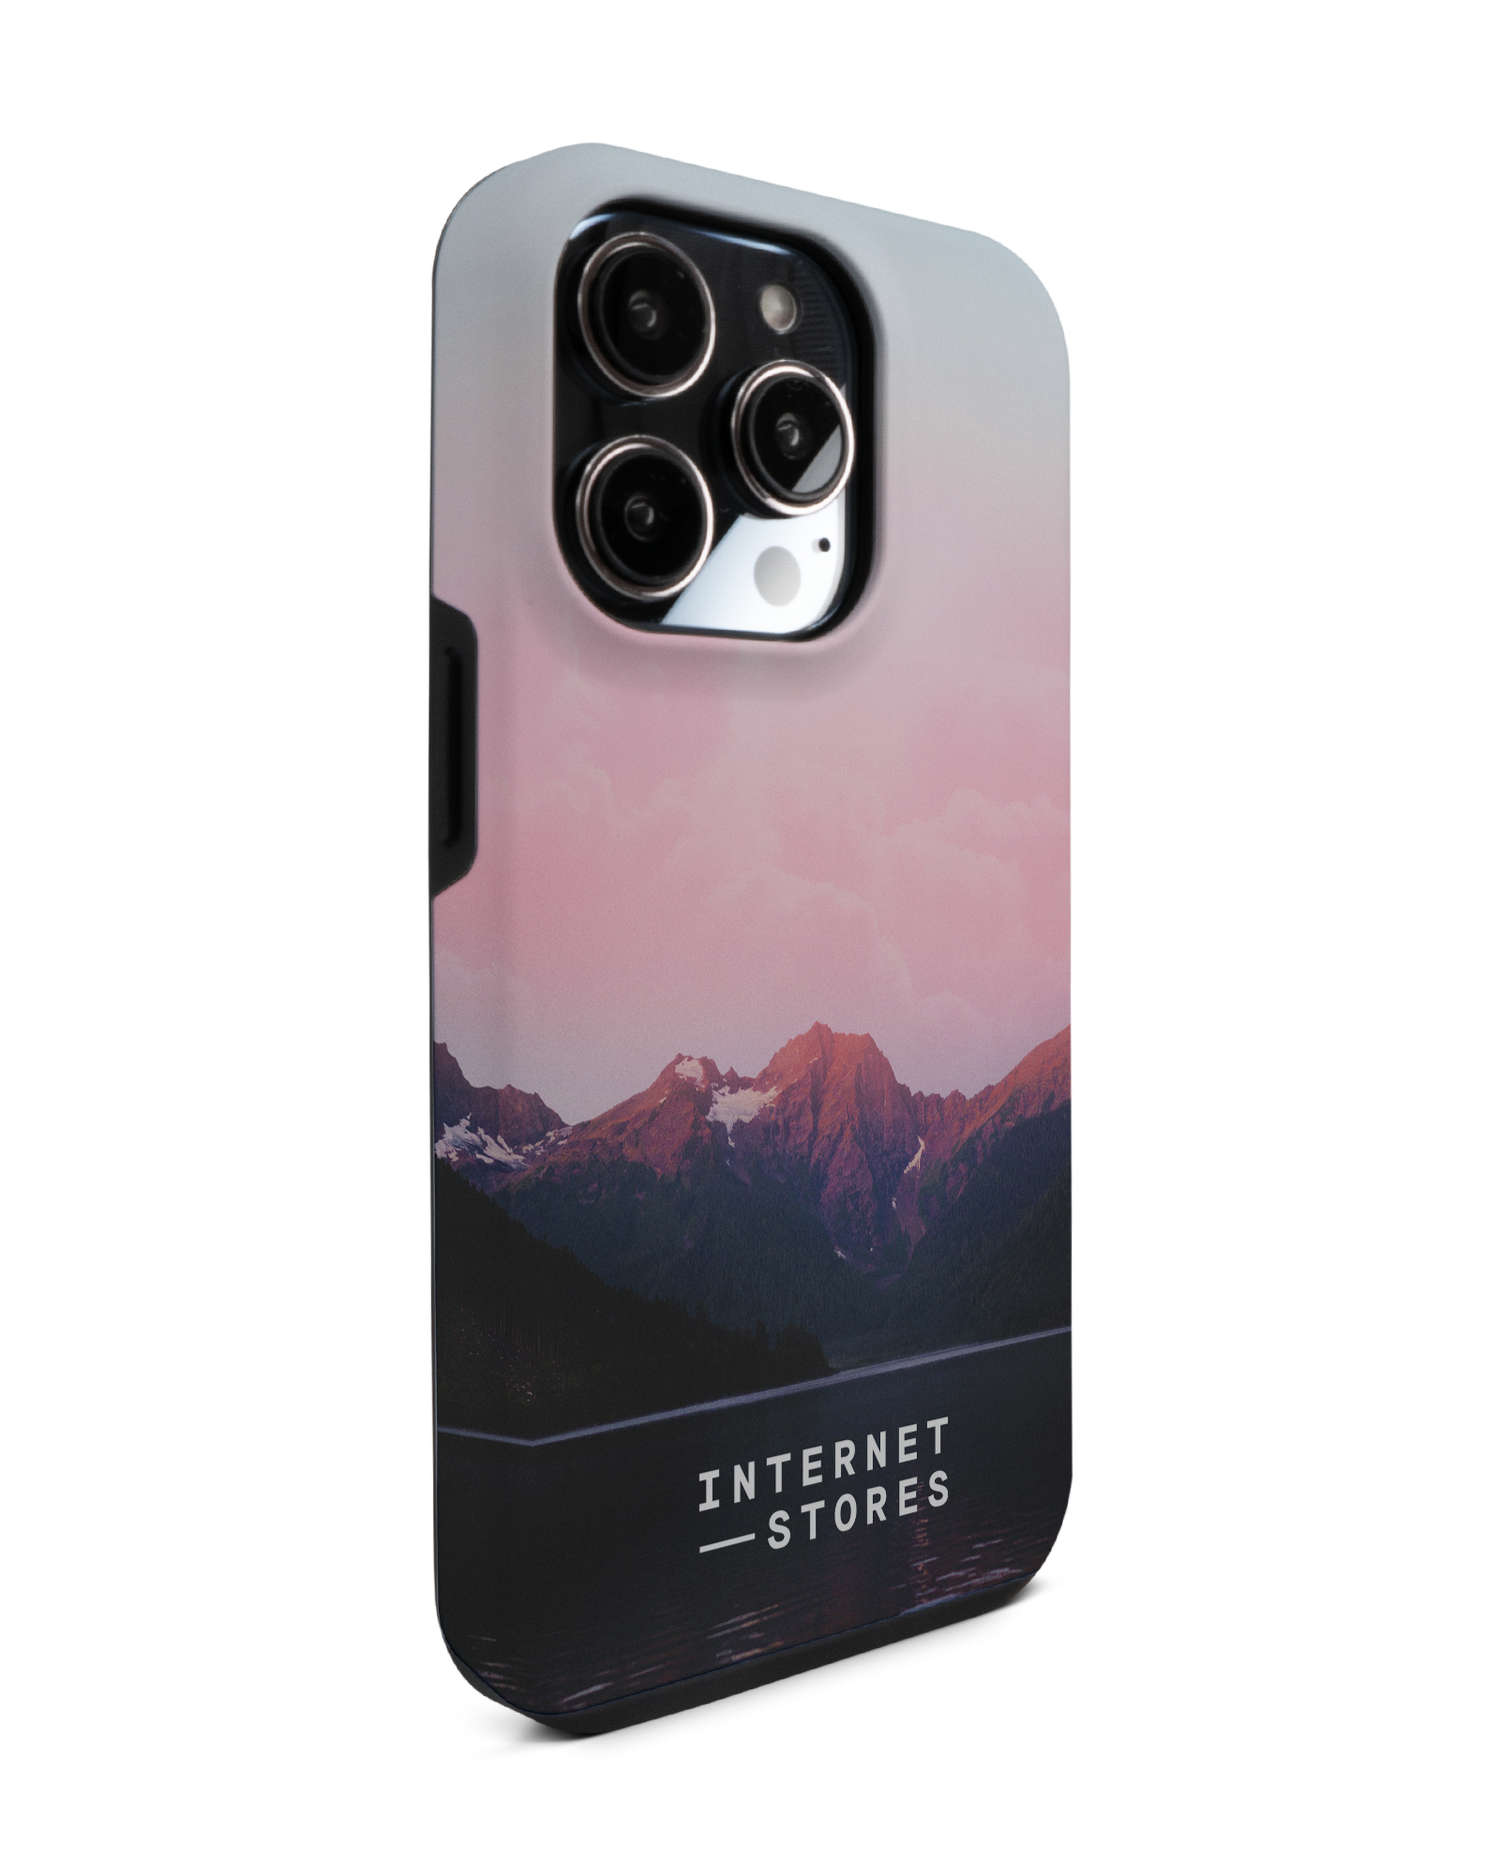 Lake Premium Phone Case for Apple iPhone 14 Pro: View from the left side